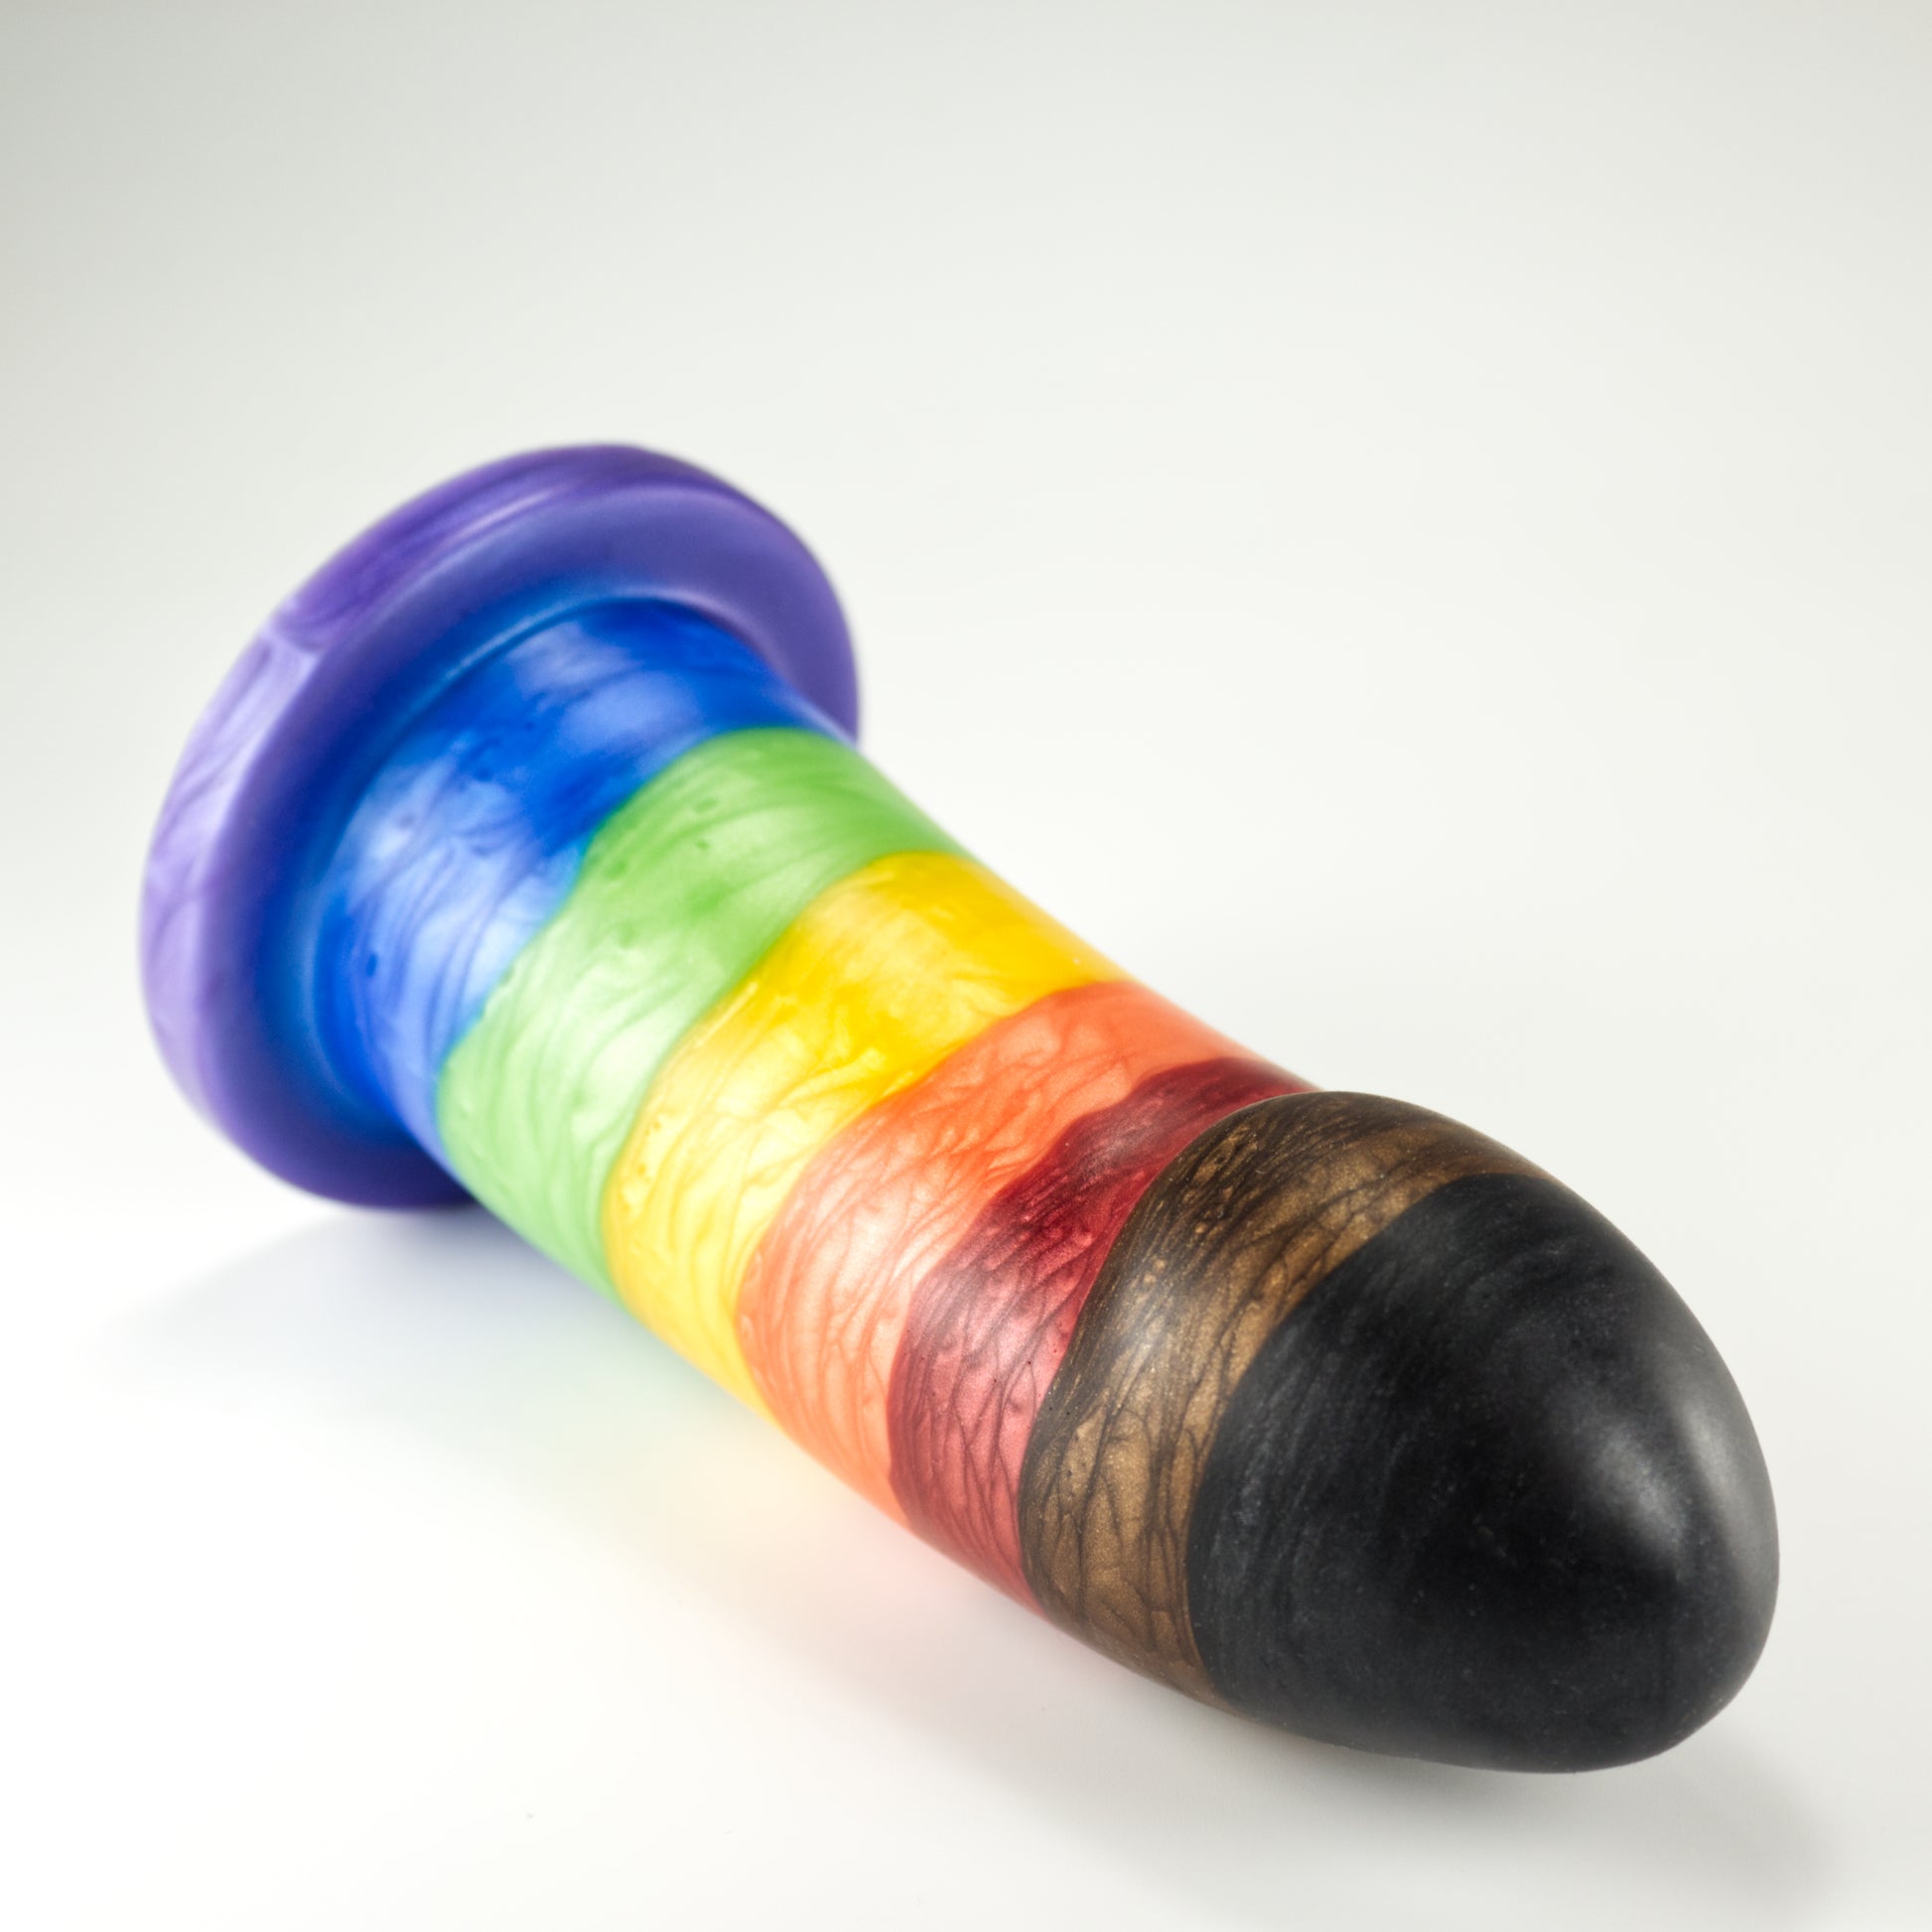 Top view of the Sidekick Extra Large, a dildo with a smooth cylinder shaped body, and a fingertip-shaped tip, and a pronounced cliff shape where they meet. The color is rainbow stripe with additional black and brown stripes at tip.